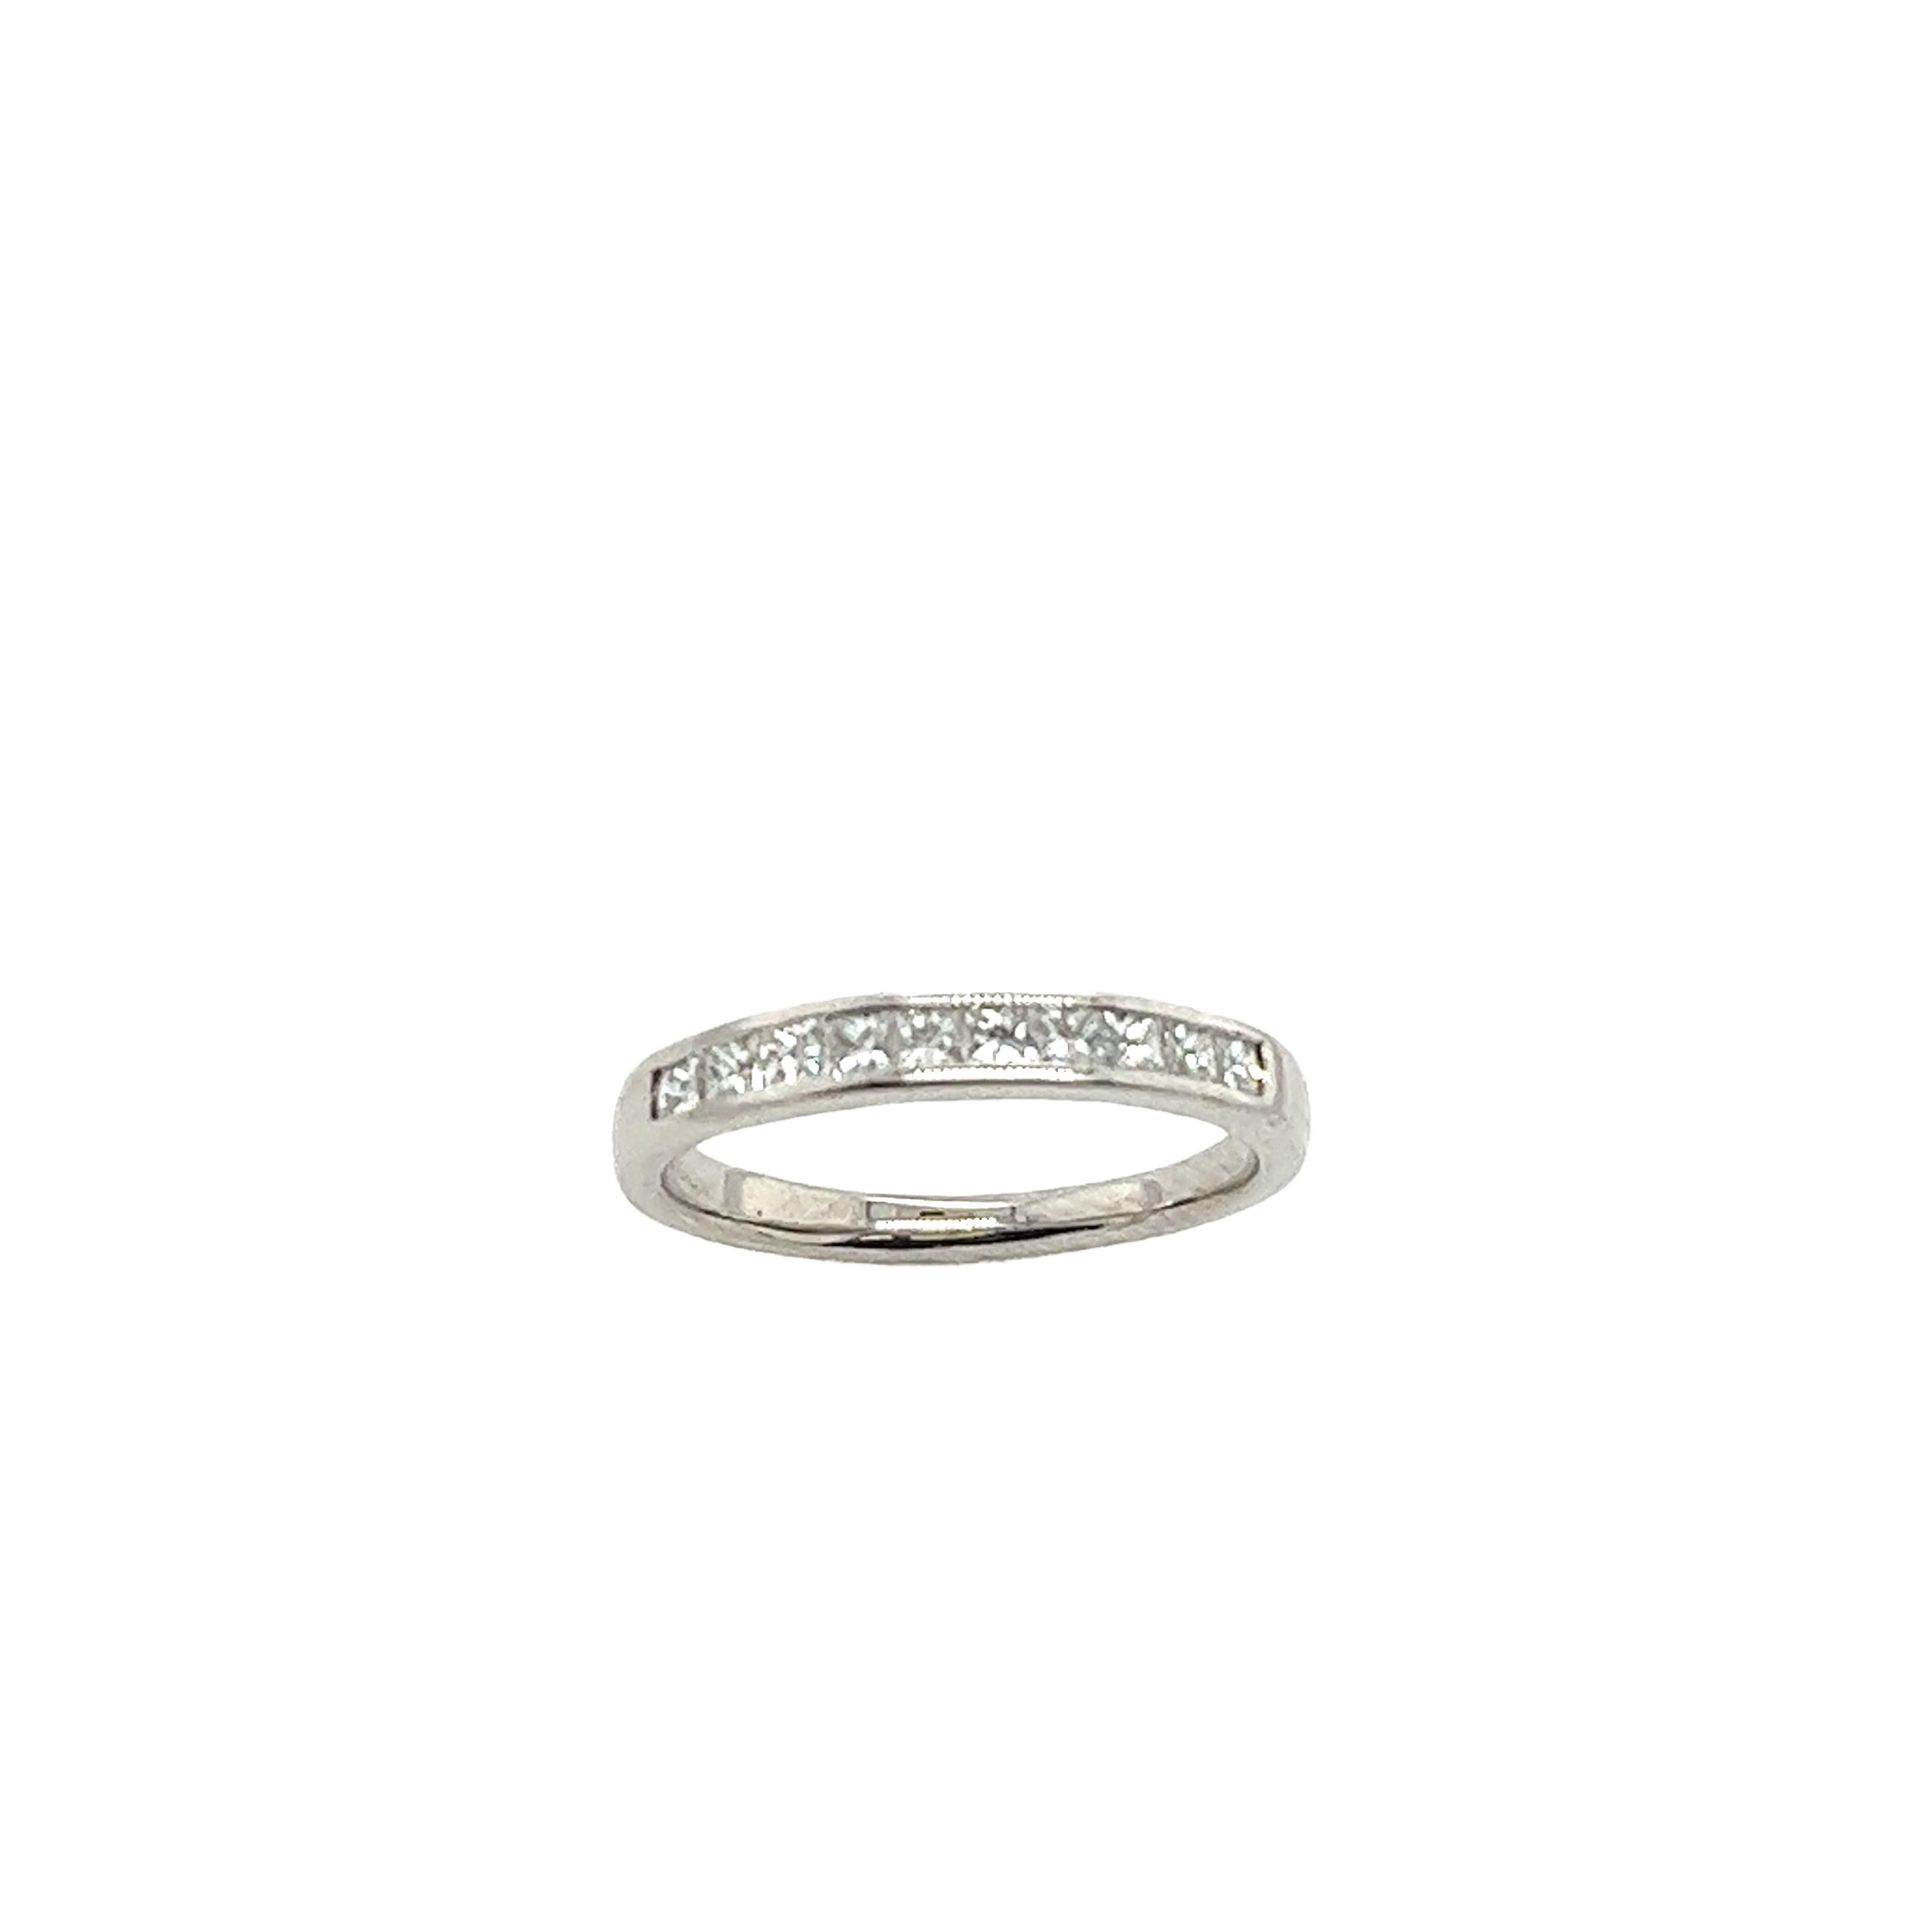 18ct White Gold Princess Cut Diamond Half Eternity Ring Set With 0.40ct H/SI1 For Sale 1